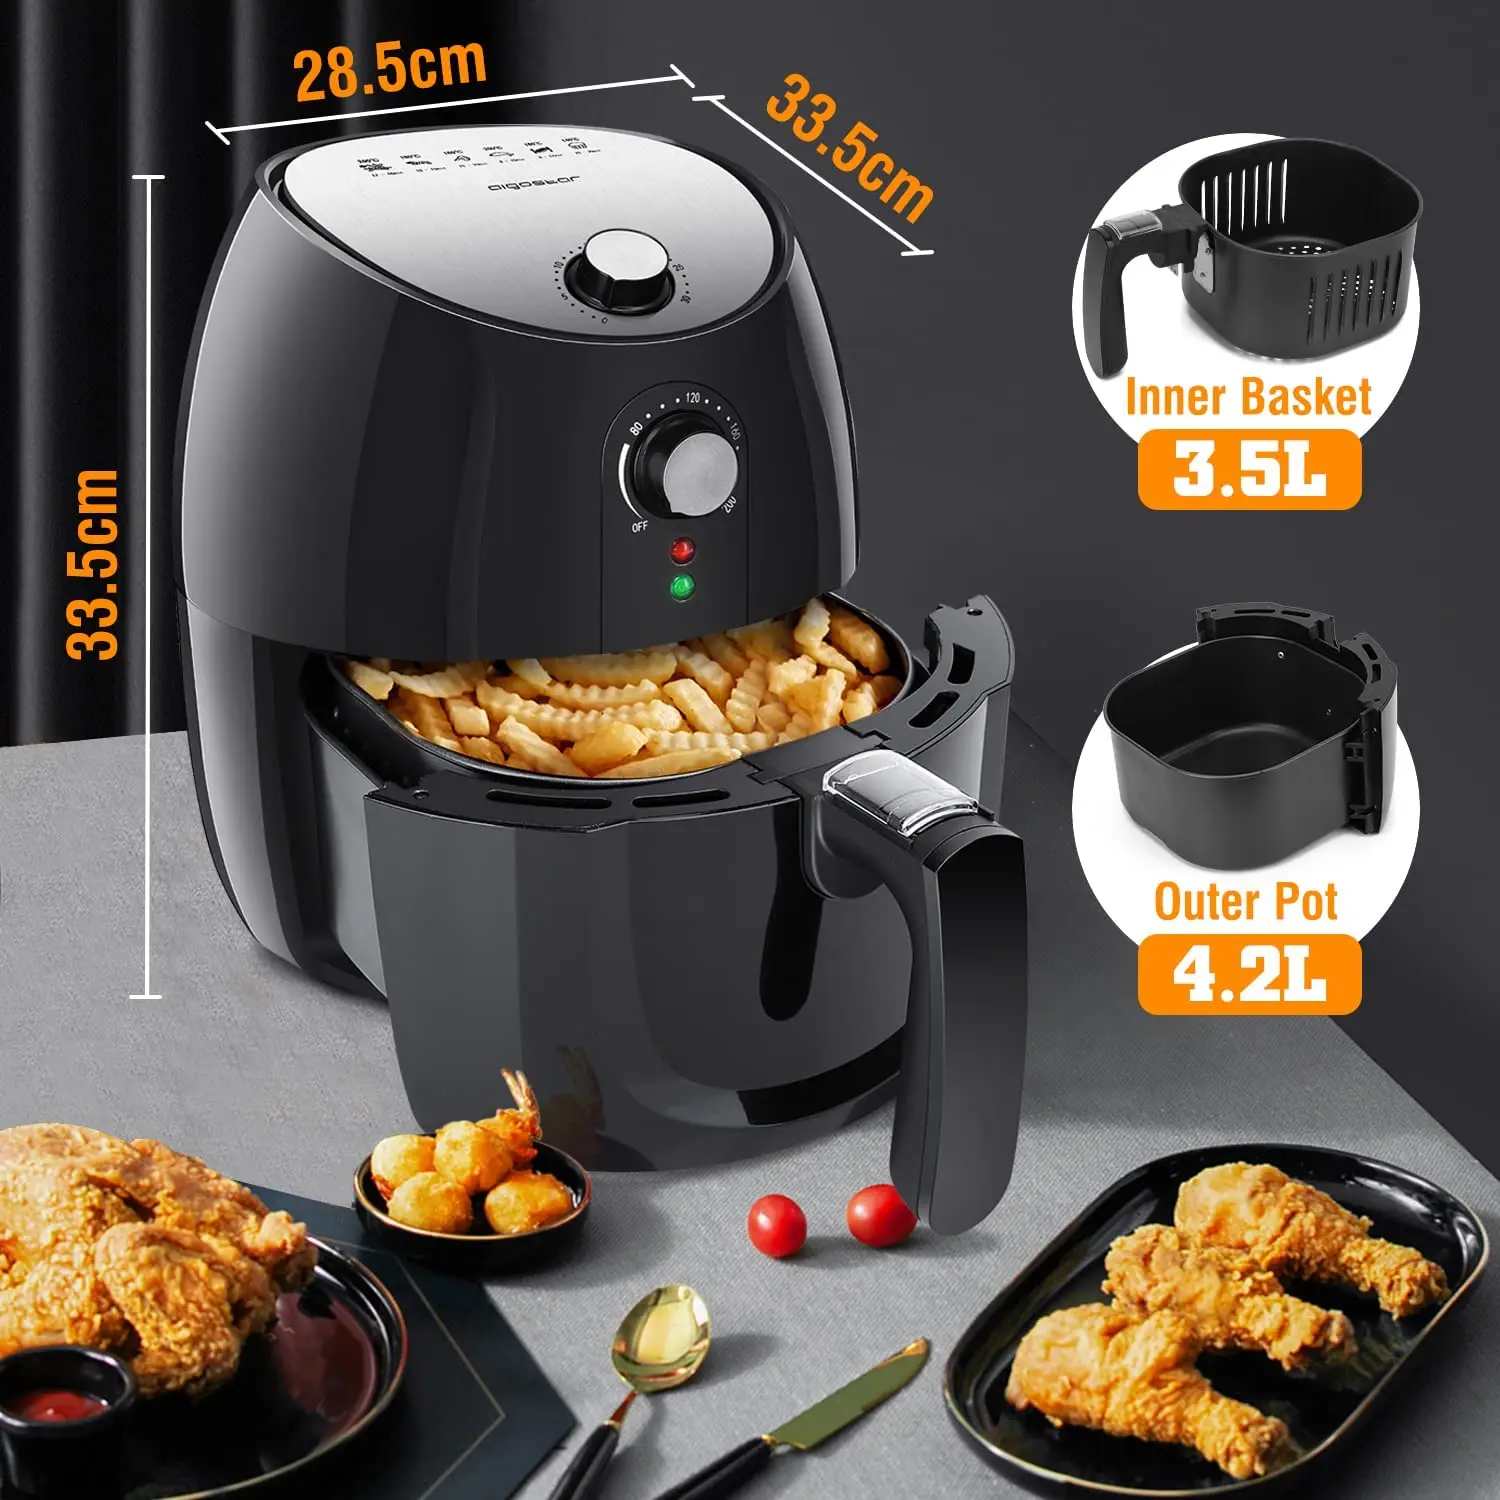 Oil Free Air Fryer, 6 Modes Preconfigured, 3,5 Liter Capacity, Non-stick  Removable Basket, Temperature Adjustable 80 ℃ to 200 ℃, 30 Minute Timer,  BPA